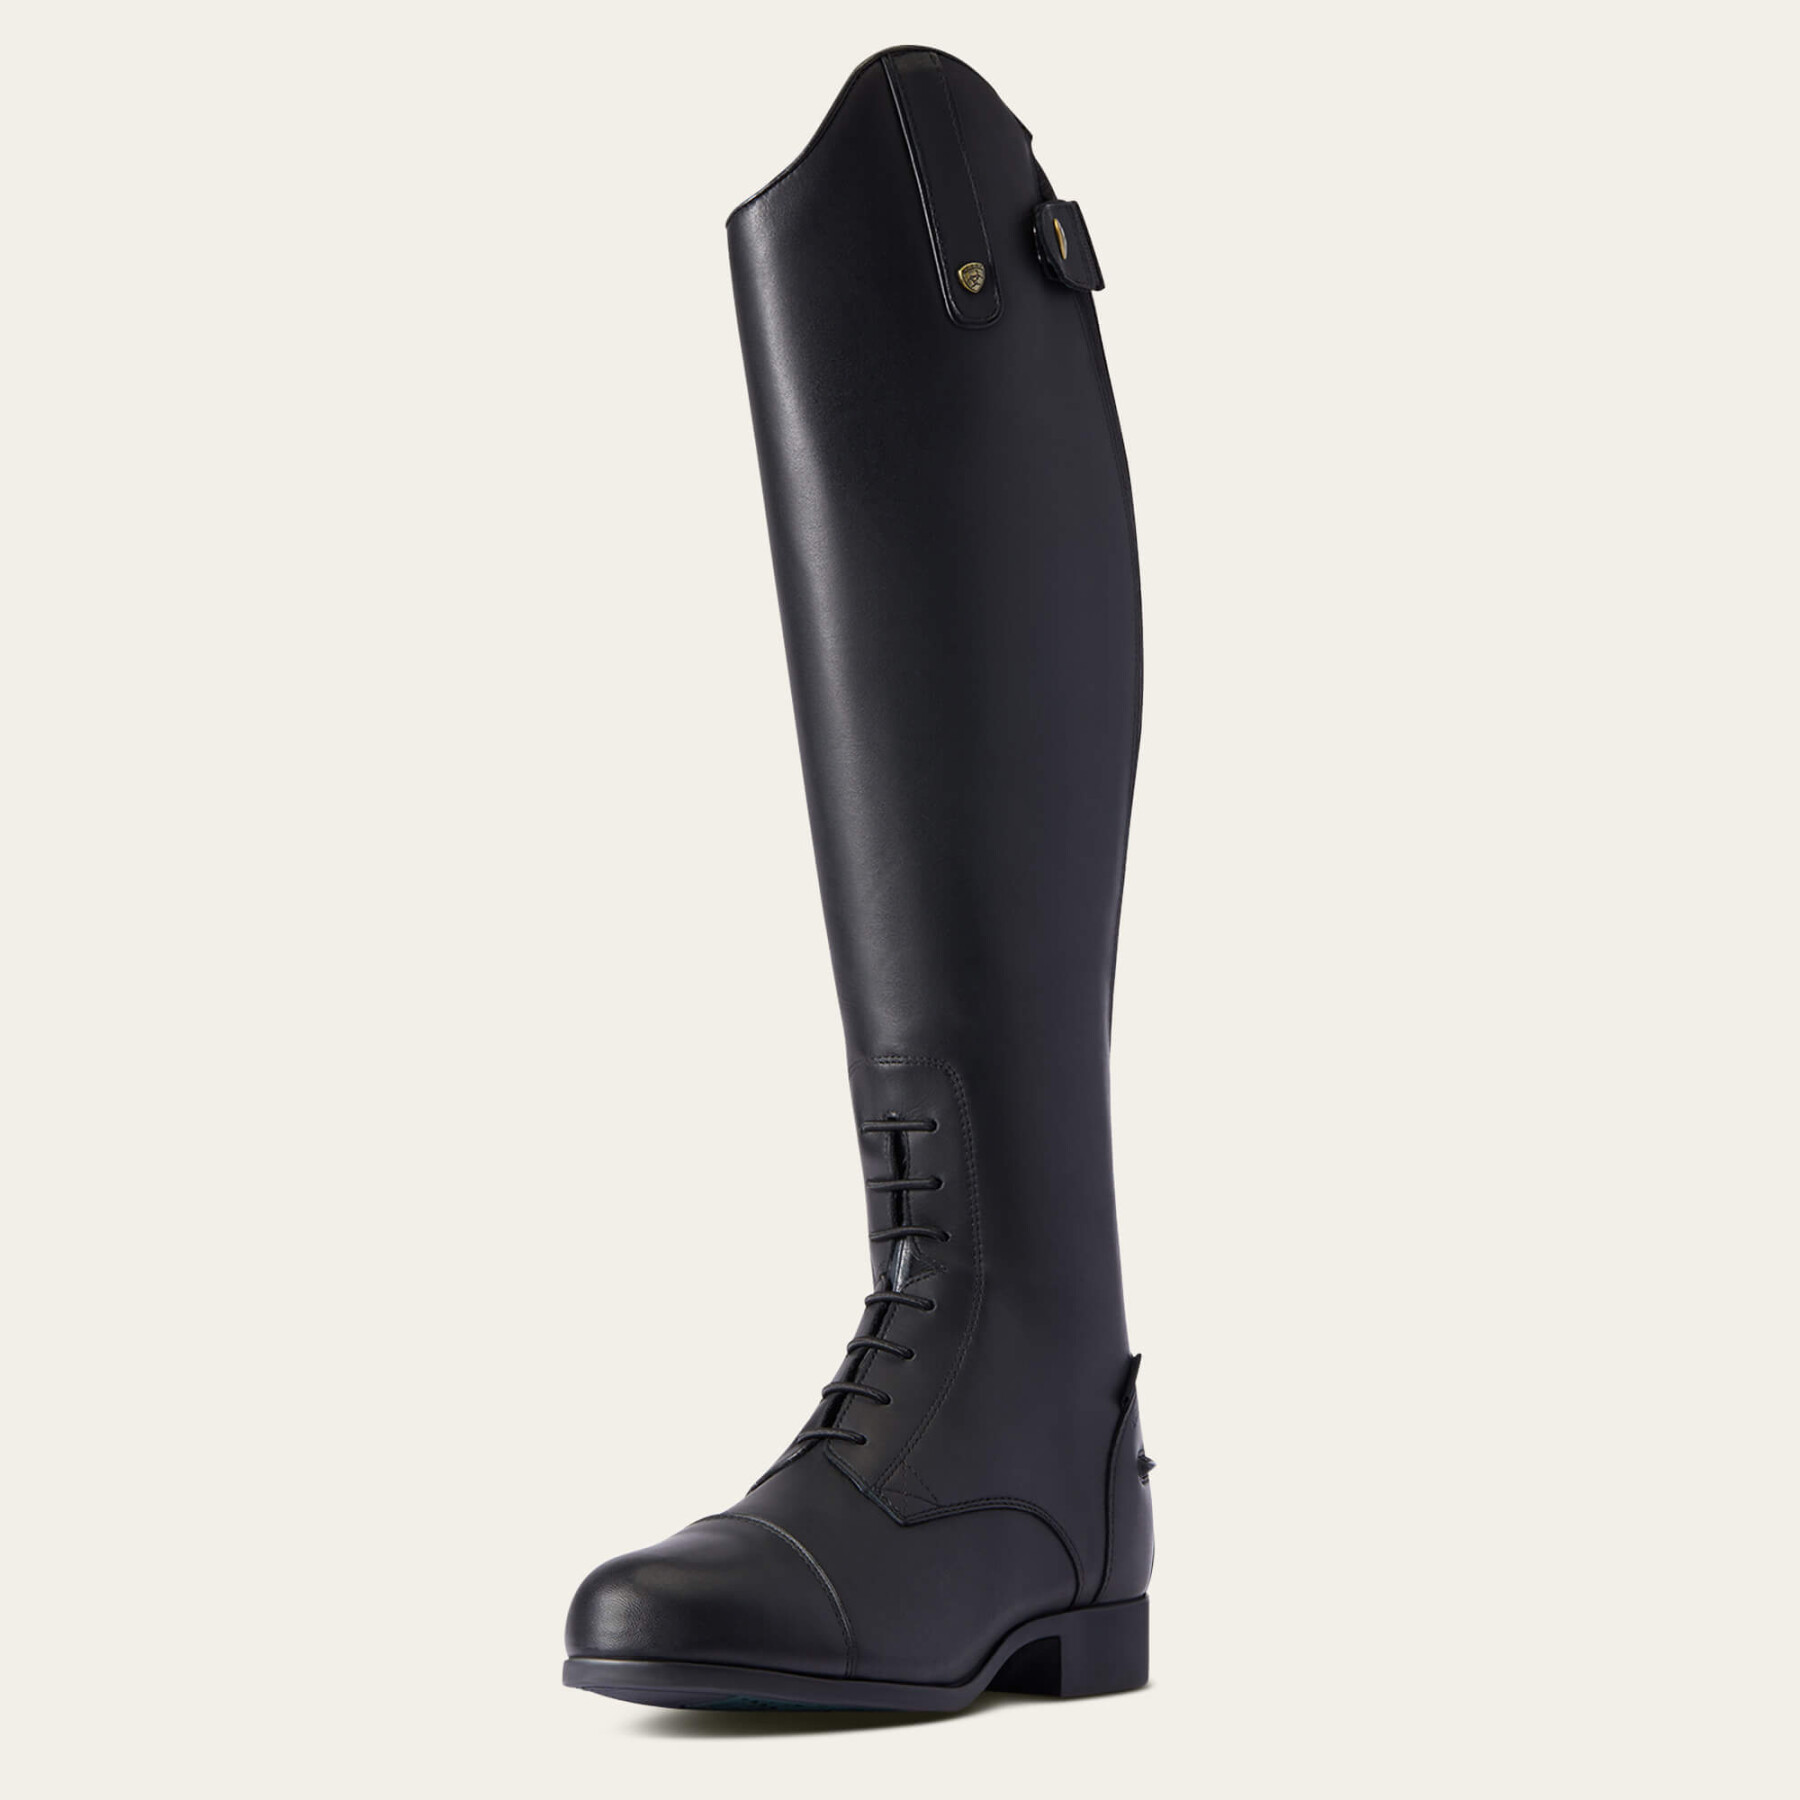 Women's waterproof riding boots Ariat Heritage Contour II H2O Insulated